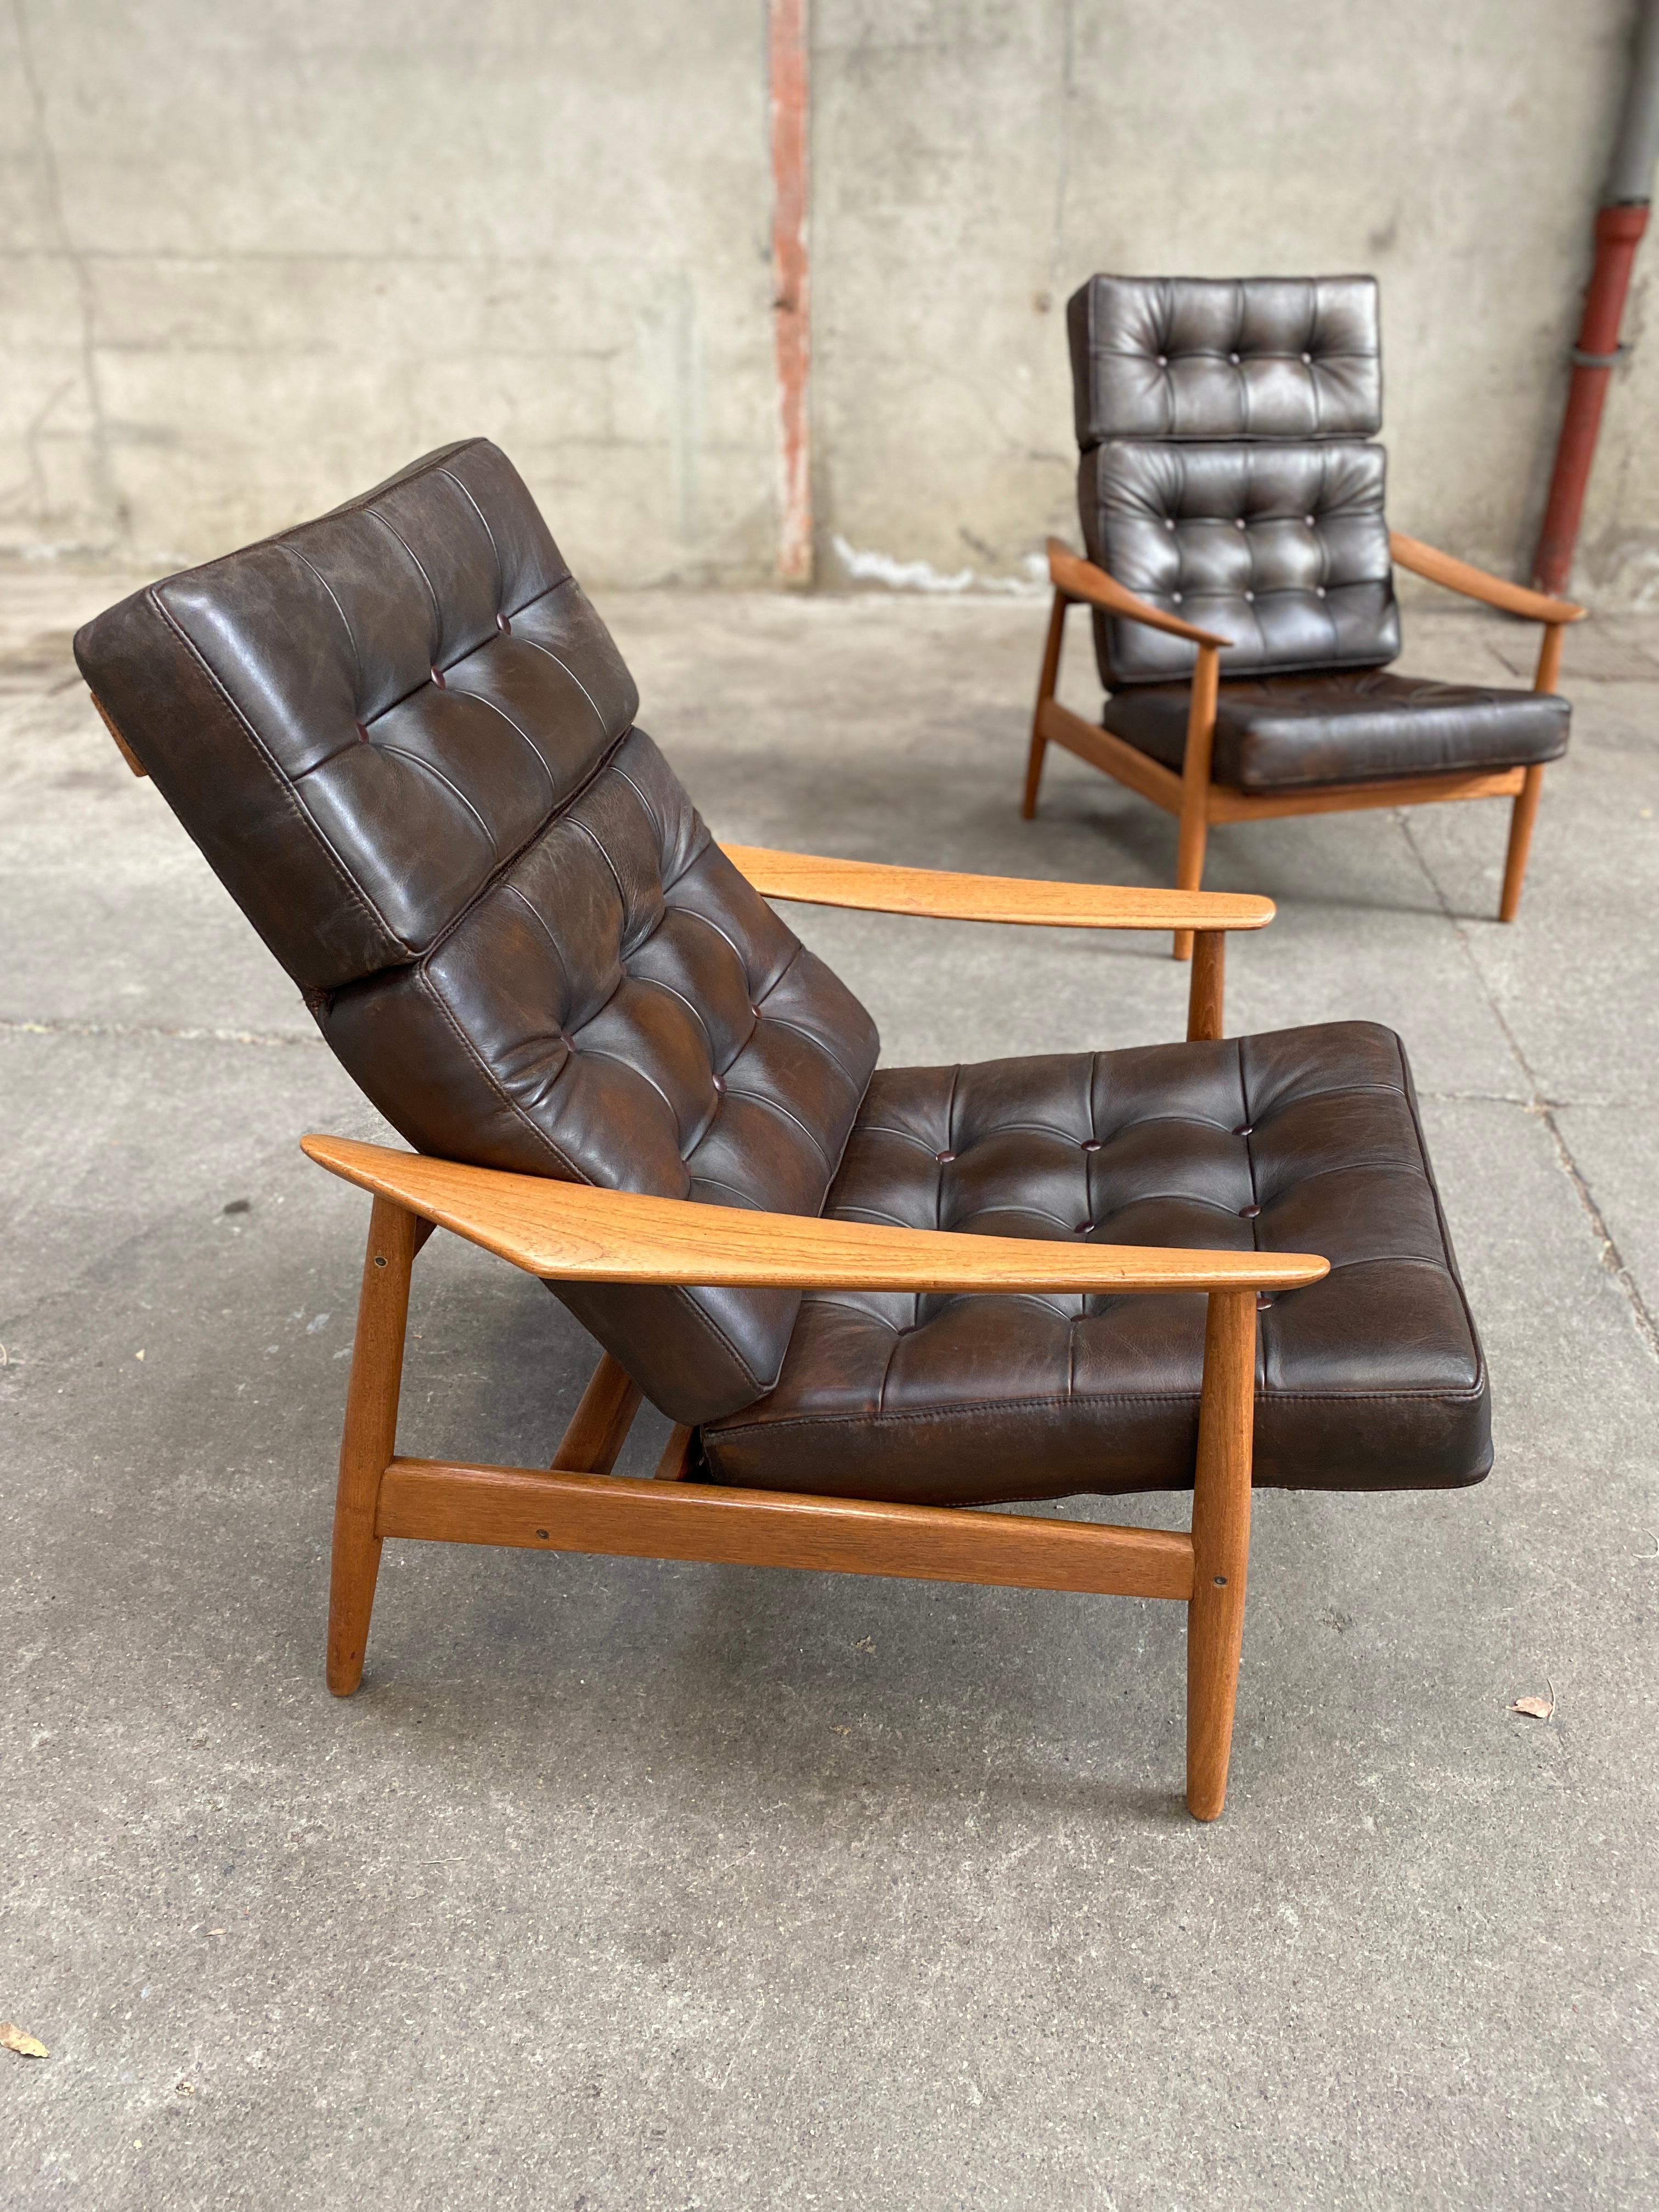 Arne Vodder
a pair of Fd164 adjustable lounge chair France & Son, 1962
A solid pair of teak lounge chair, 